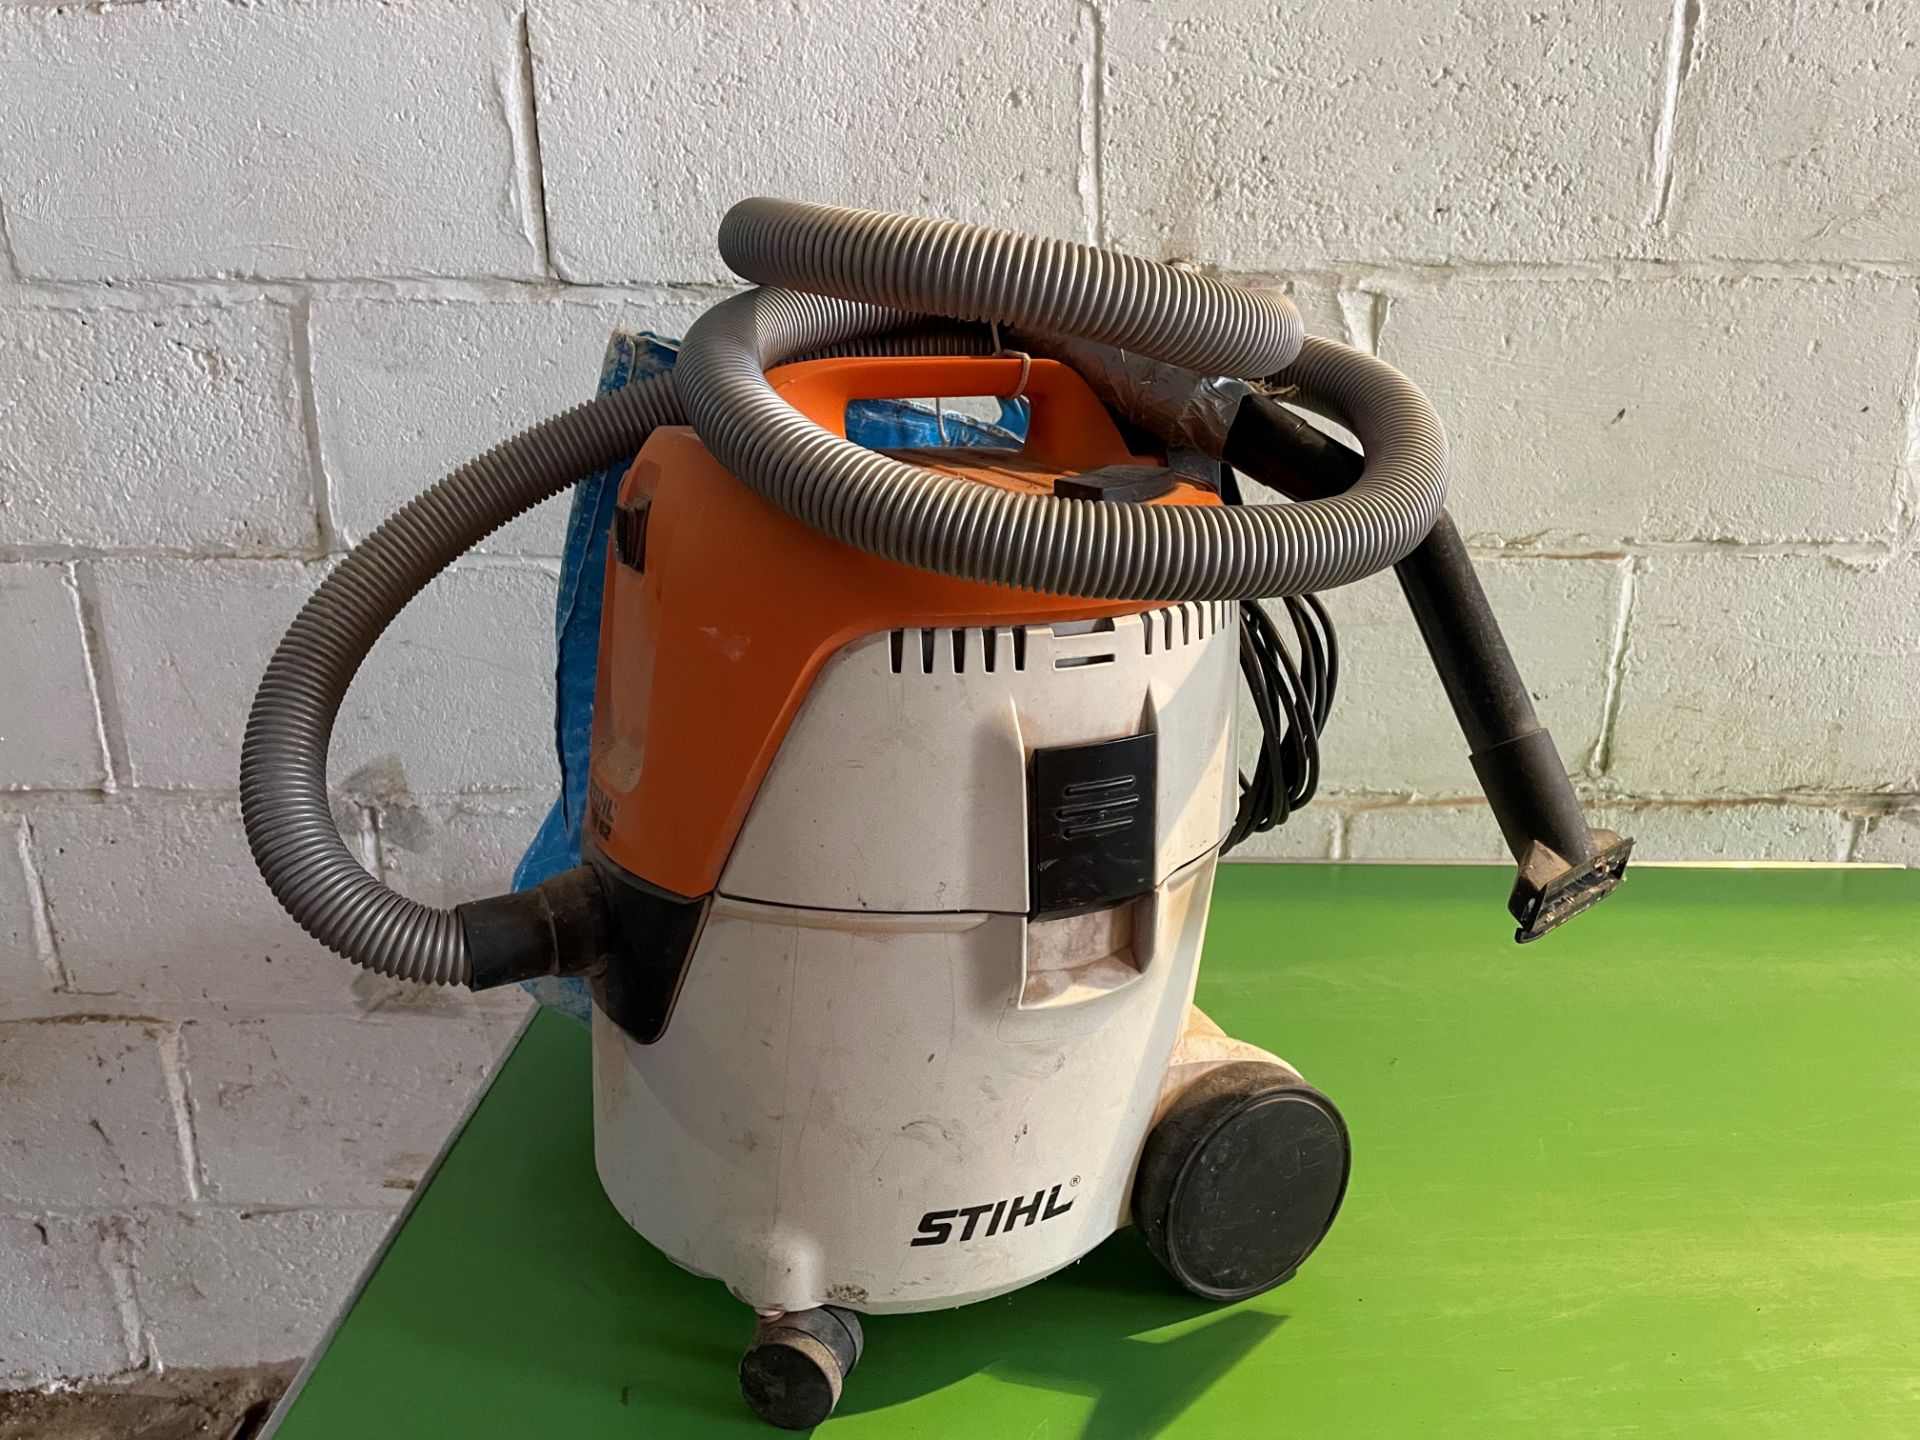 Stihl 240v hoover- SE82 with pipe attachments